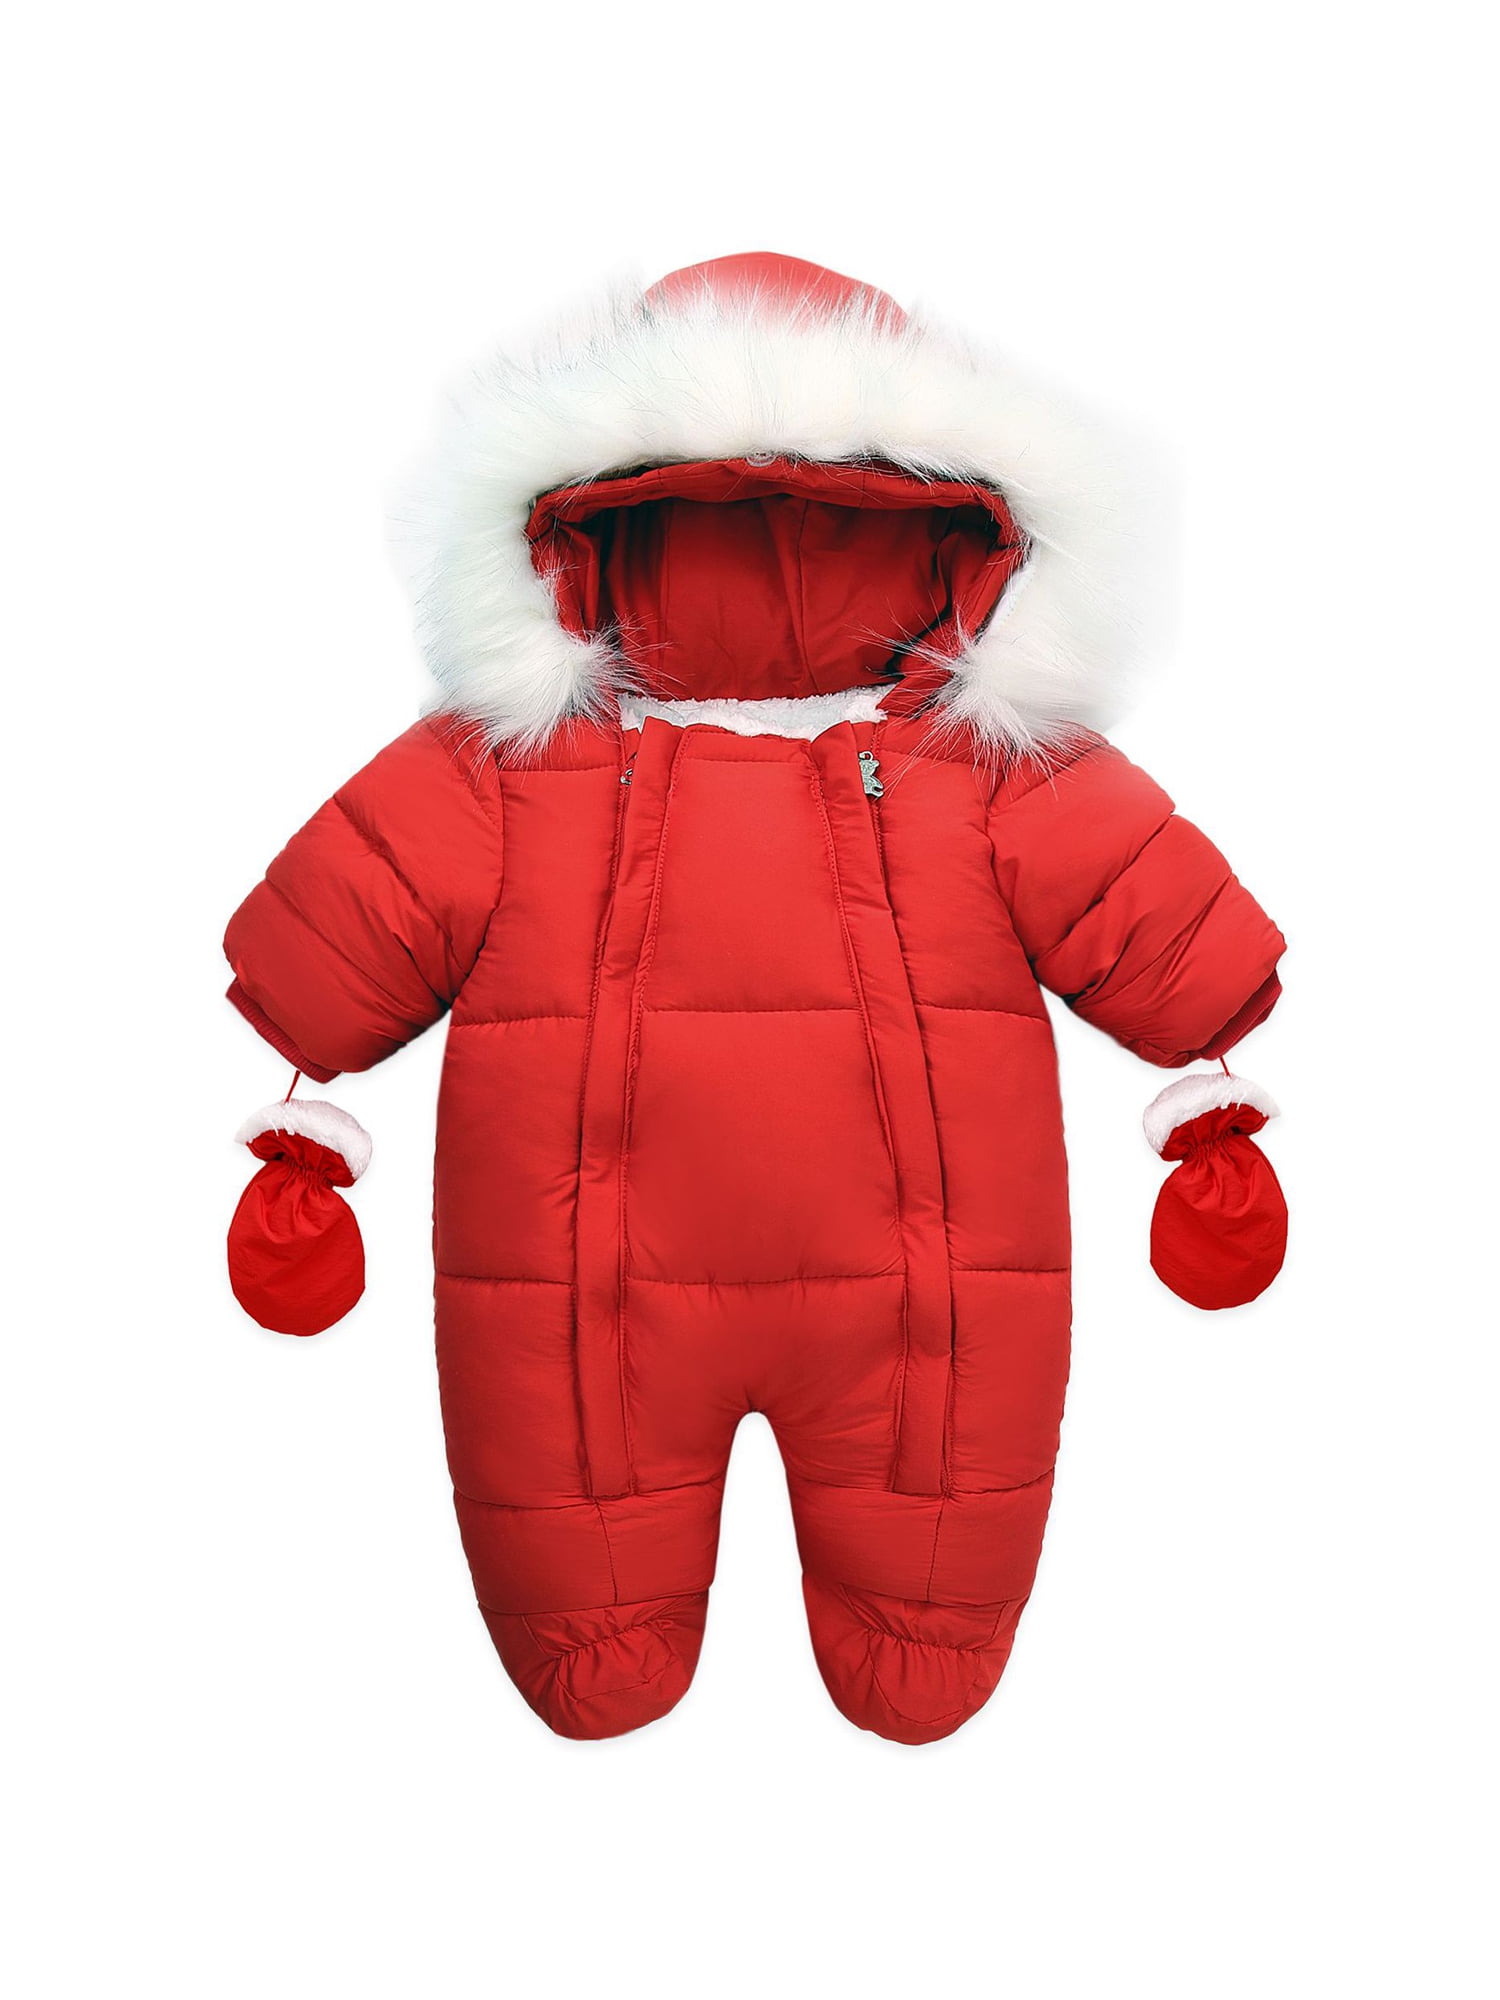 Weant Newborn Infant Toddler Baby Snowsuit Quilted Thicken Down Jacket Outwear Winter Puffer Hooded Romper Jumpsuit Onesie All in One Snow Suit for Kids Gifts Boys Girls Unisex Rompers 